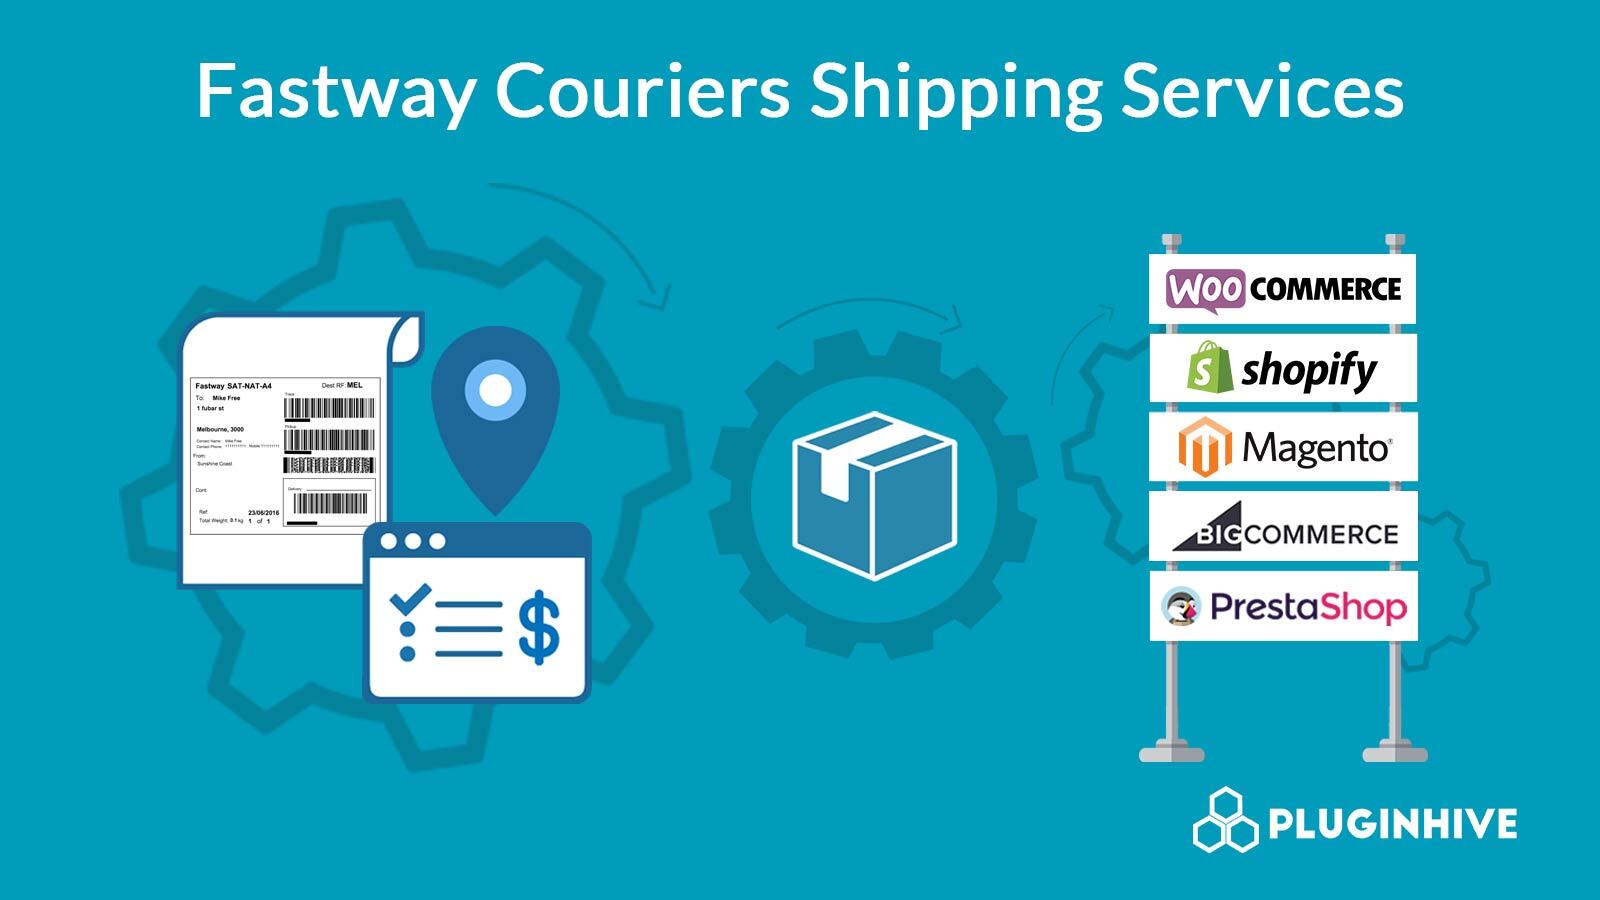 Fastway-couriers-shipping-services